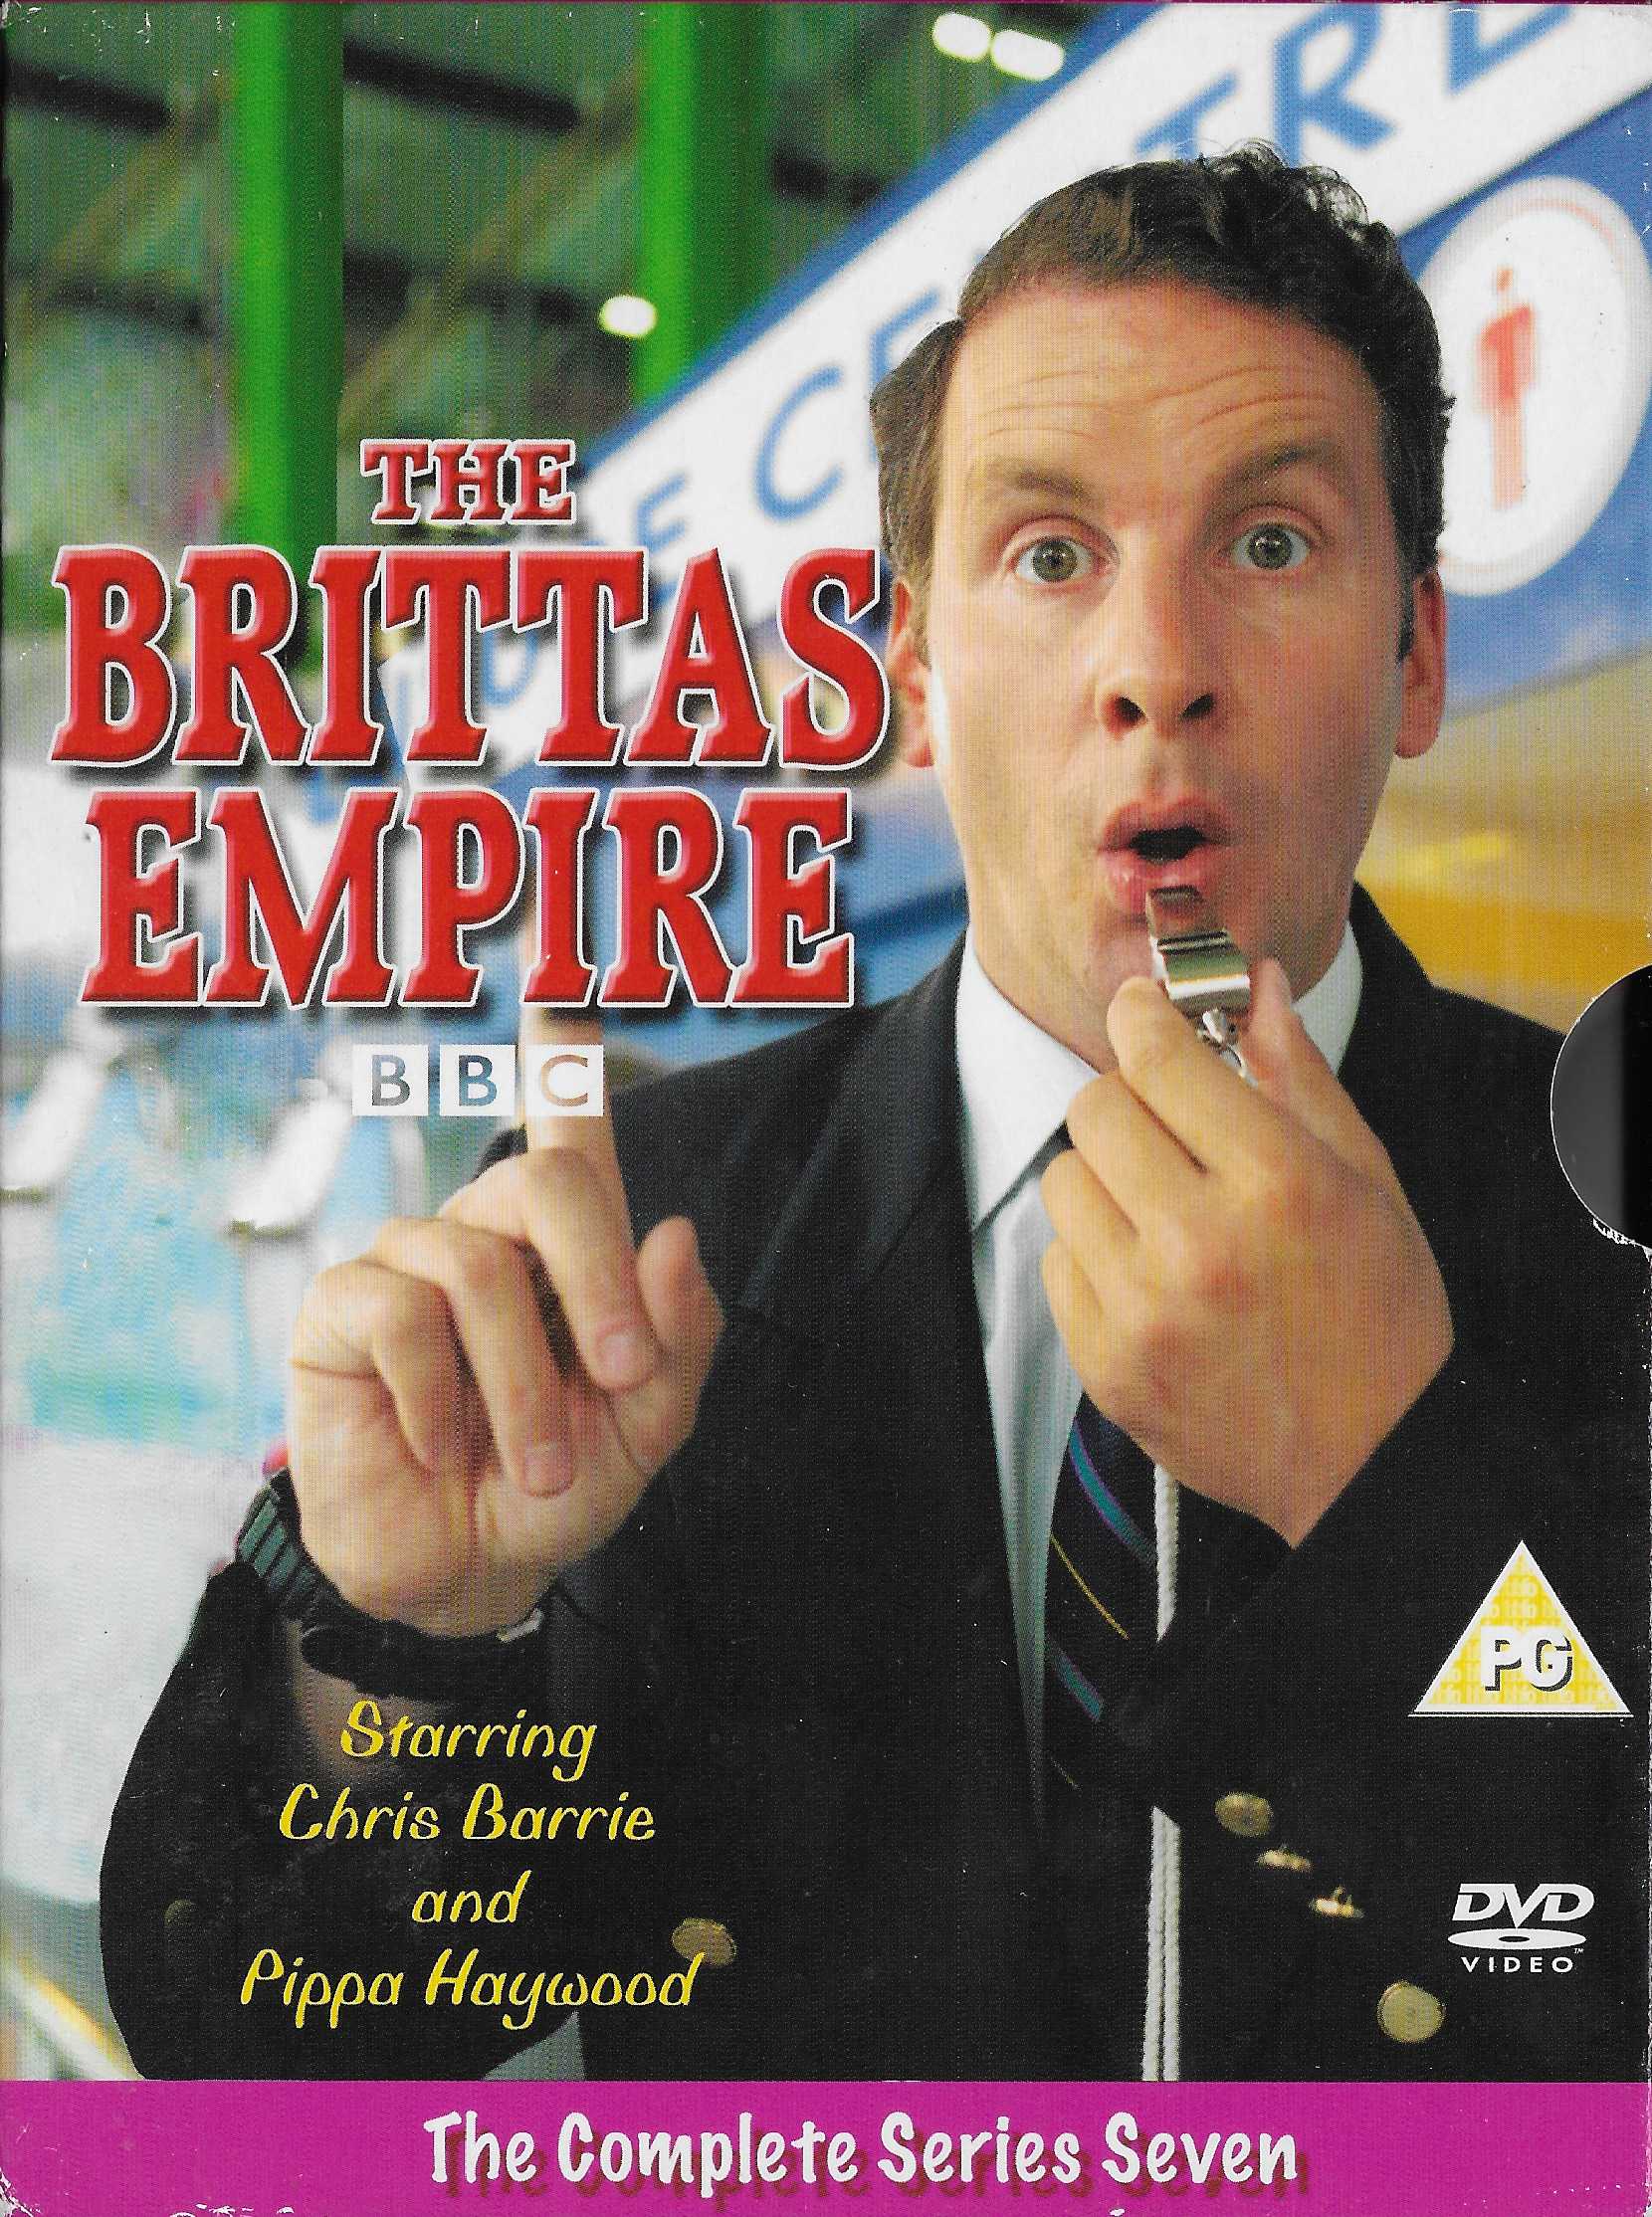 Picture of EKA 50022 The Brittas empire - Series 7 by artist Ian Davidson / Peter Vincent / Tony Millan / Mike Walling / Terry Kyan / Paul Smith from the BBC dvds - Records and Tapes library